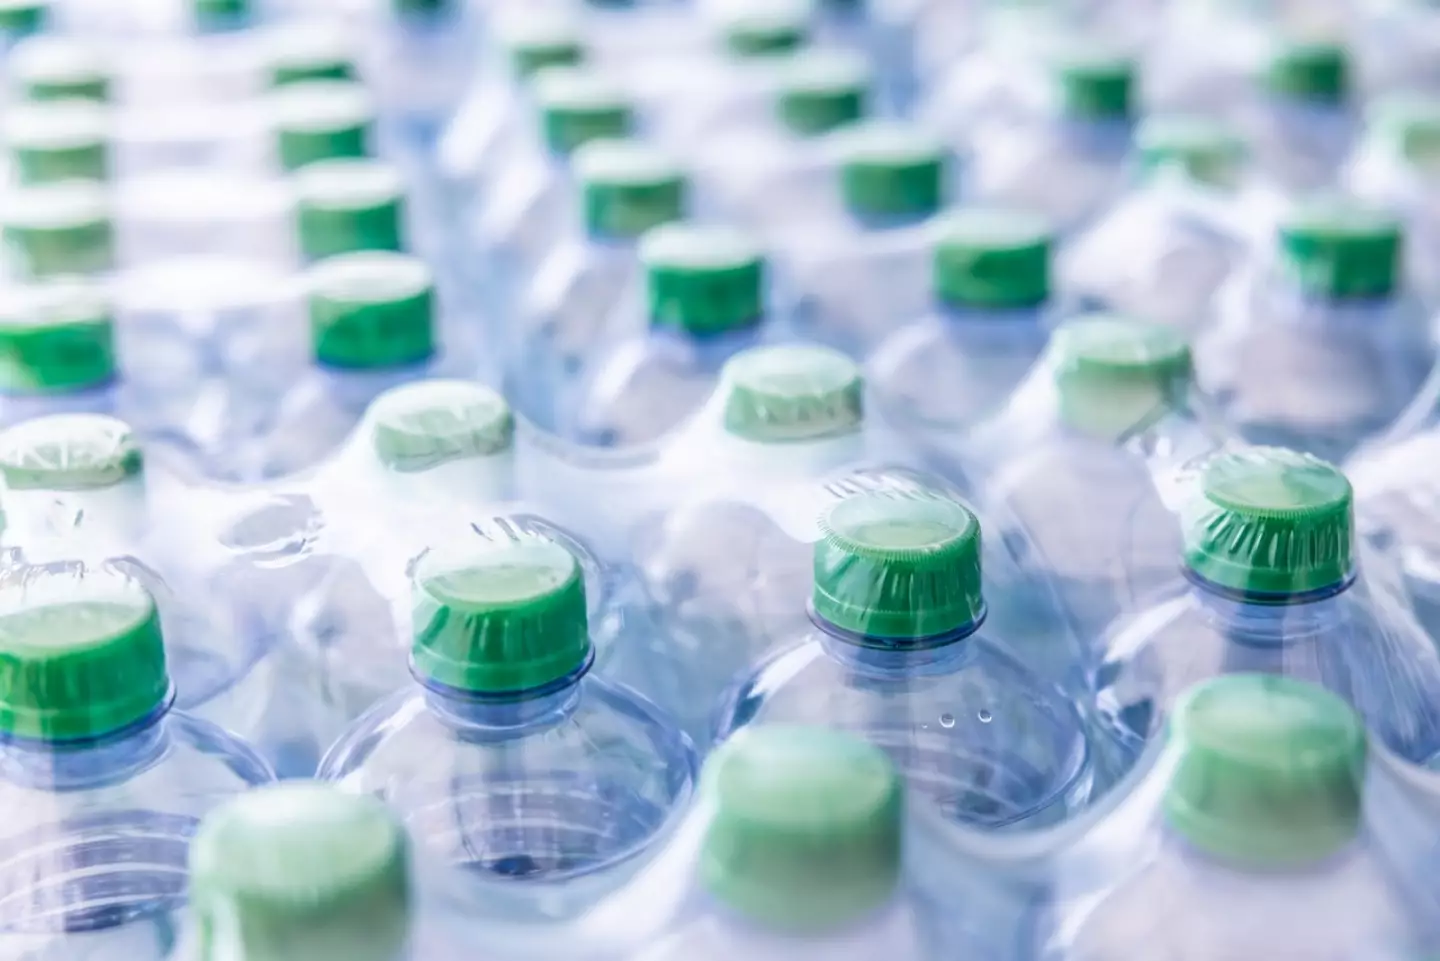 An important warning has been issued to people who drink bottled water.